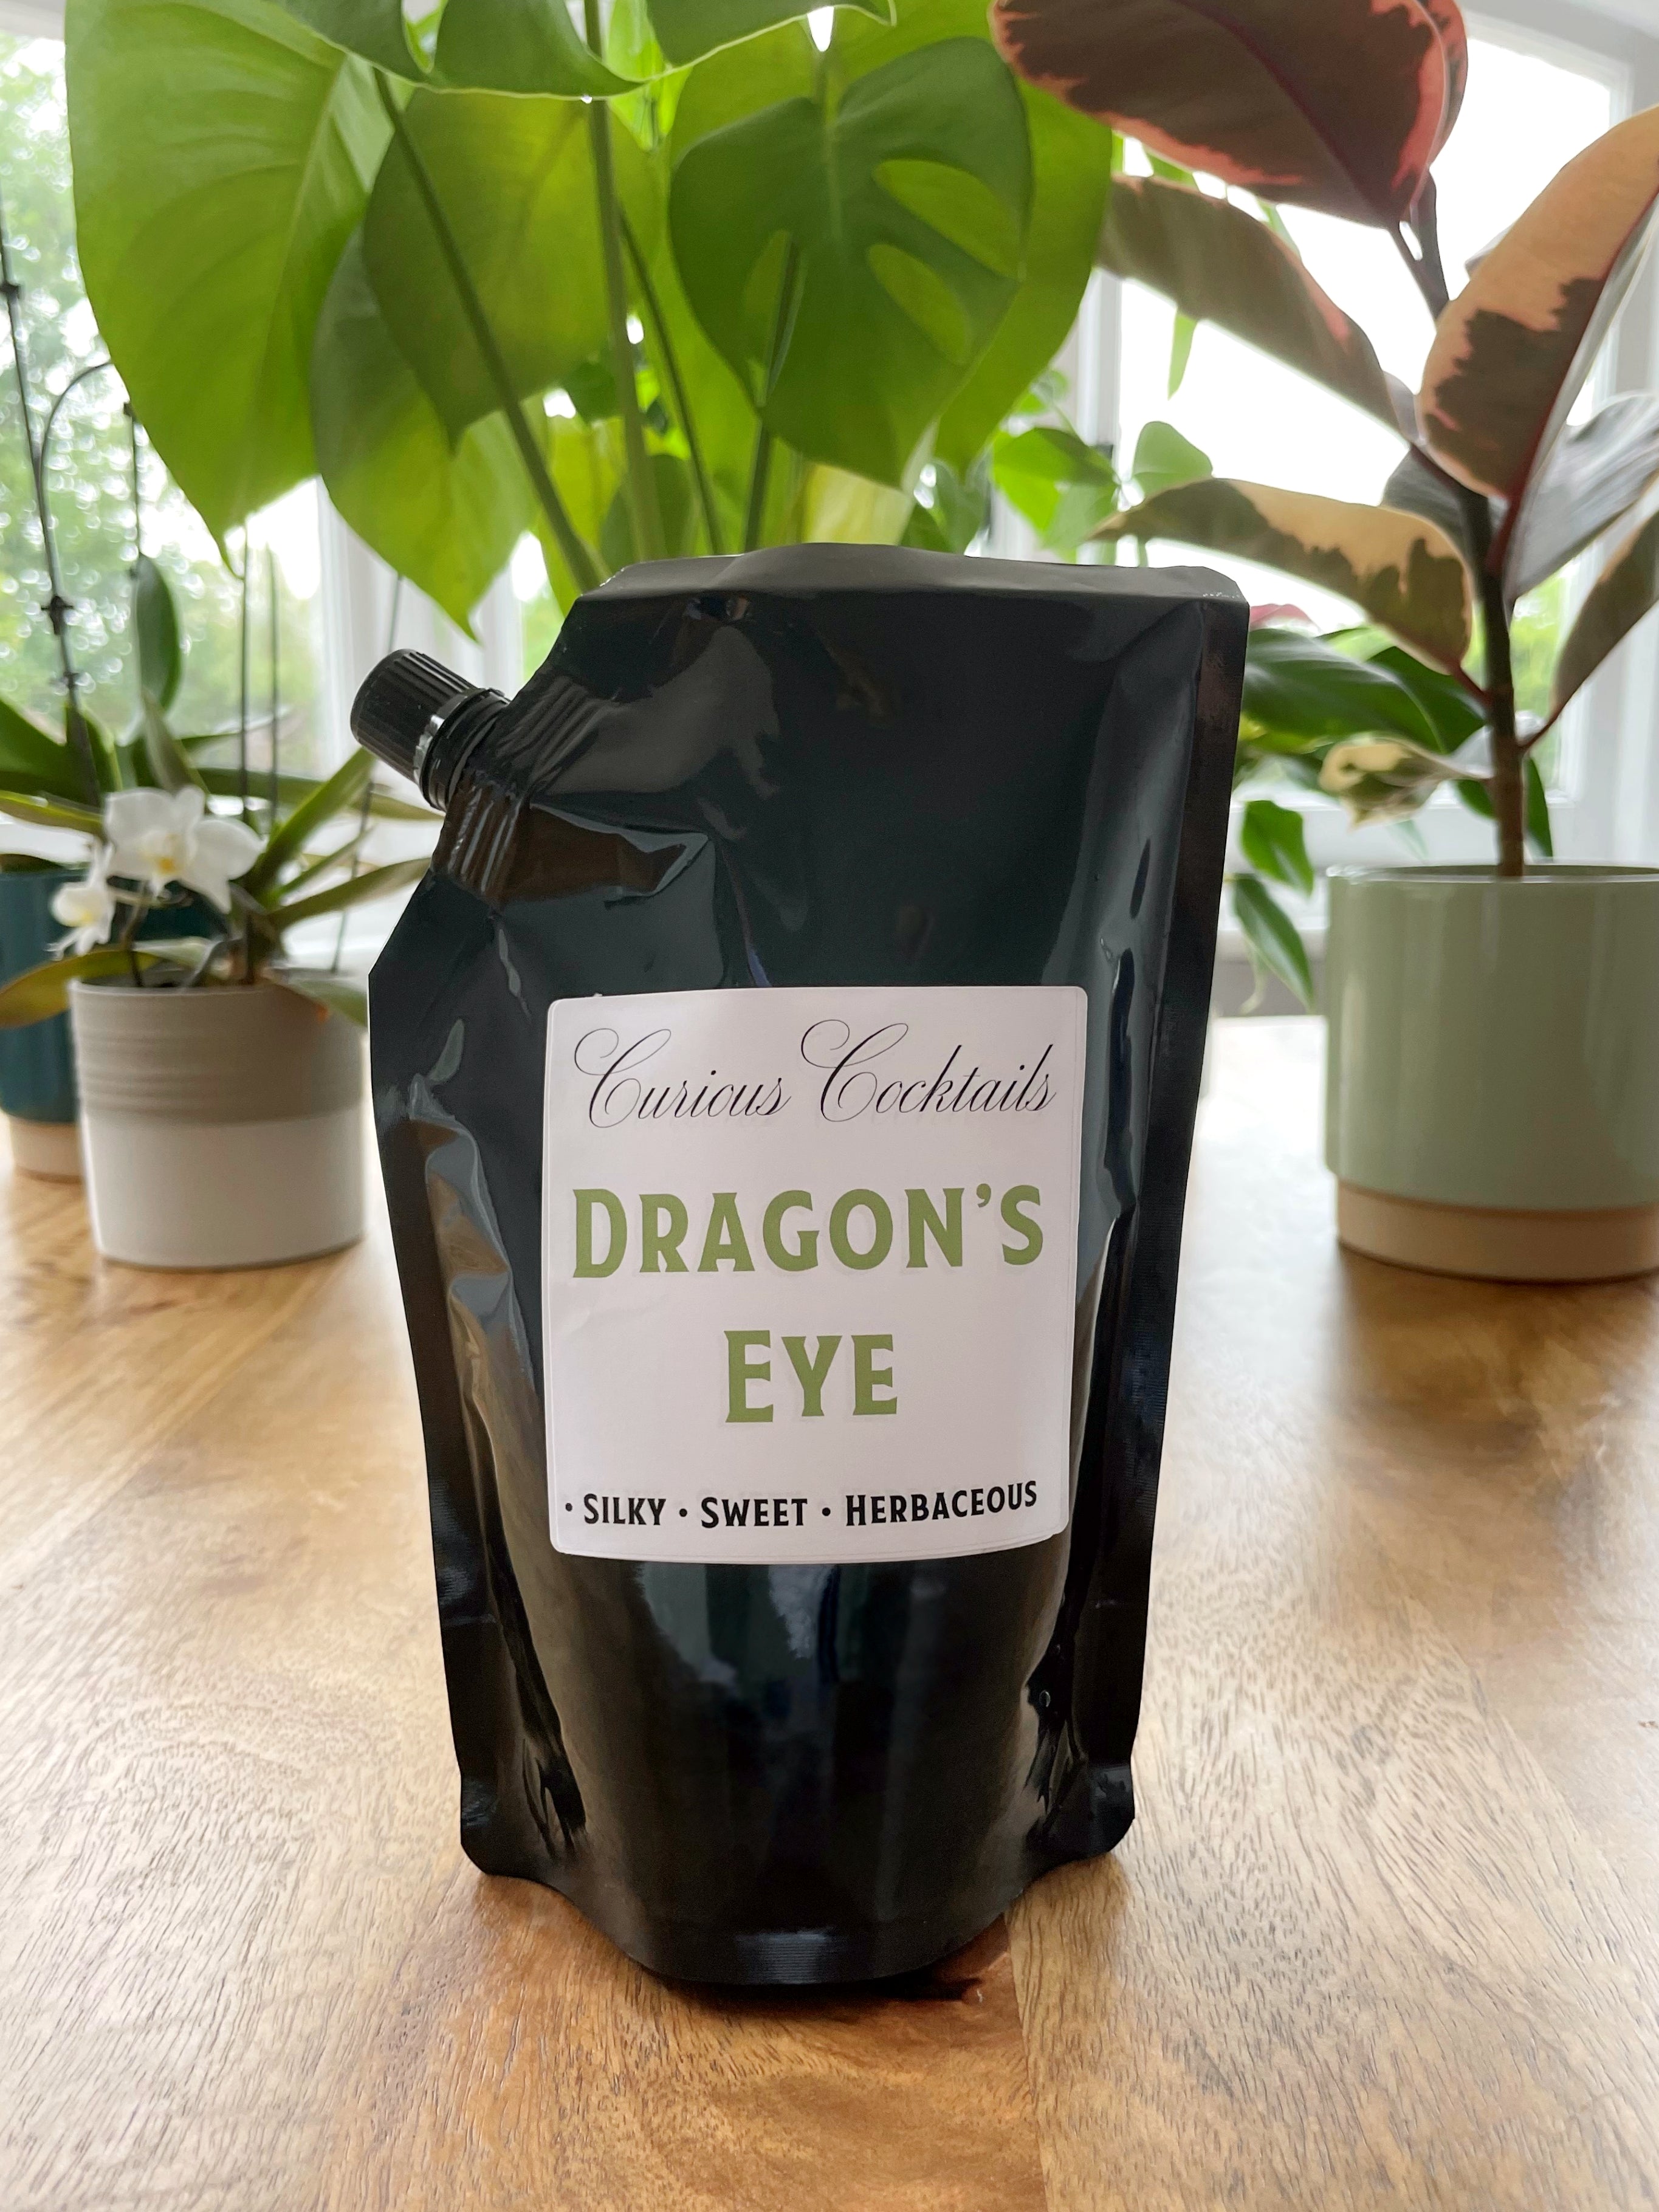 Curious Cocktails: Dragon's Eye